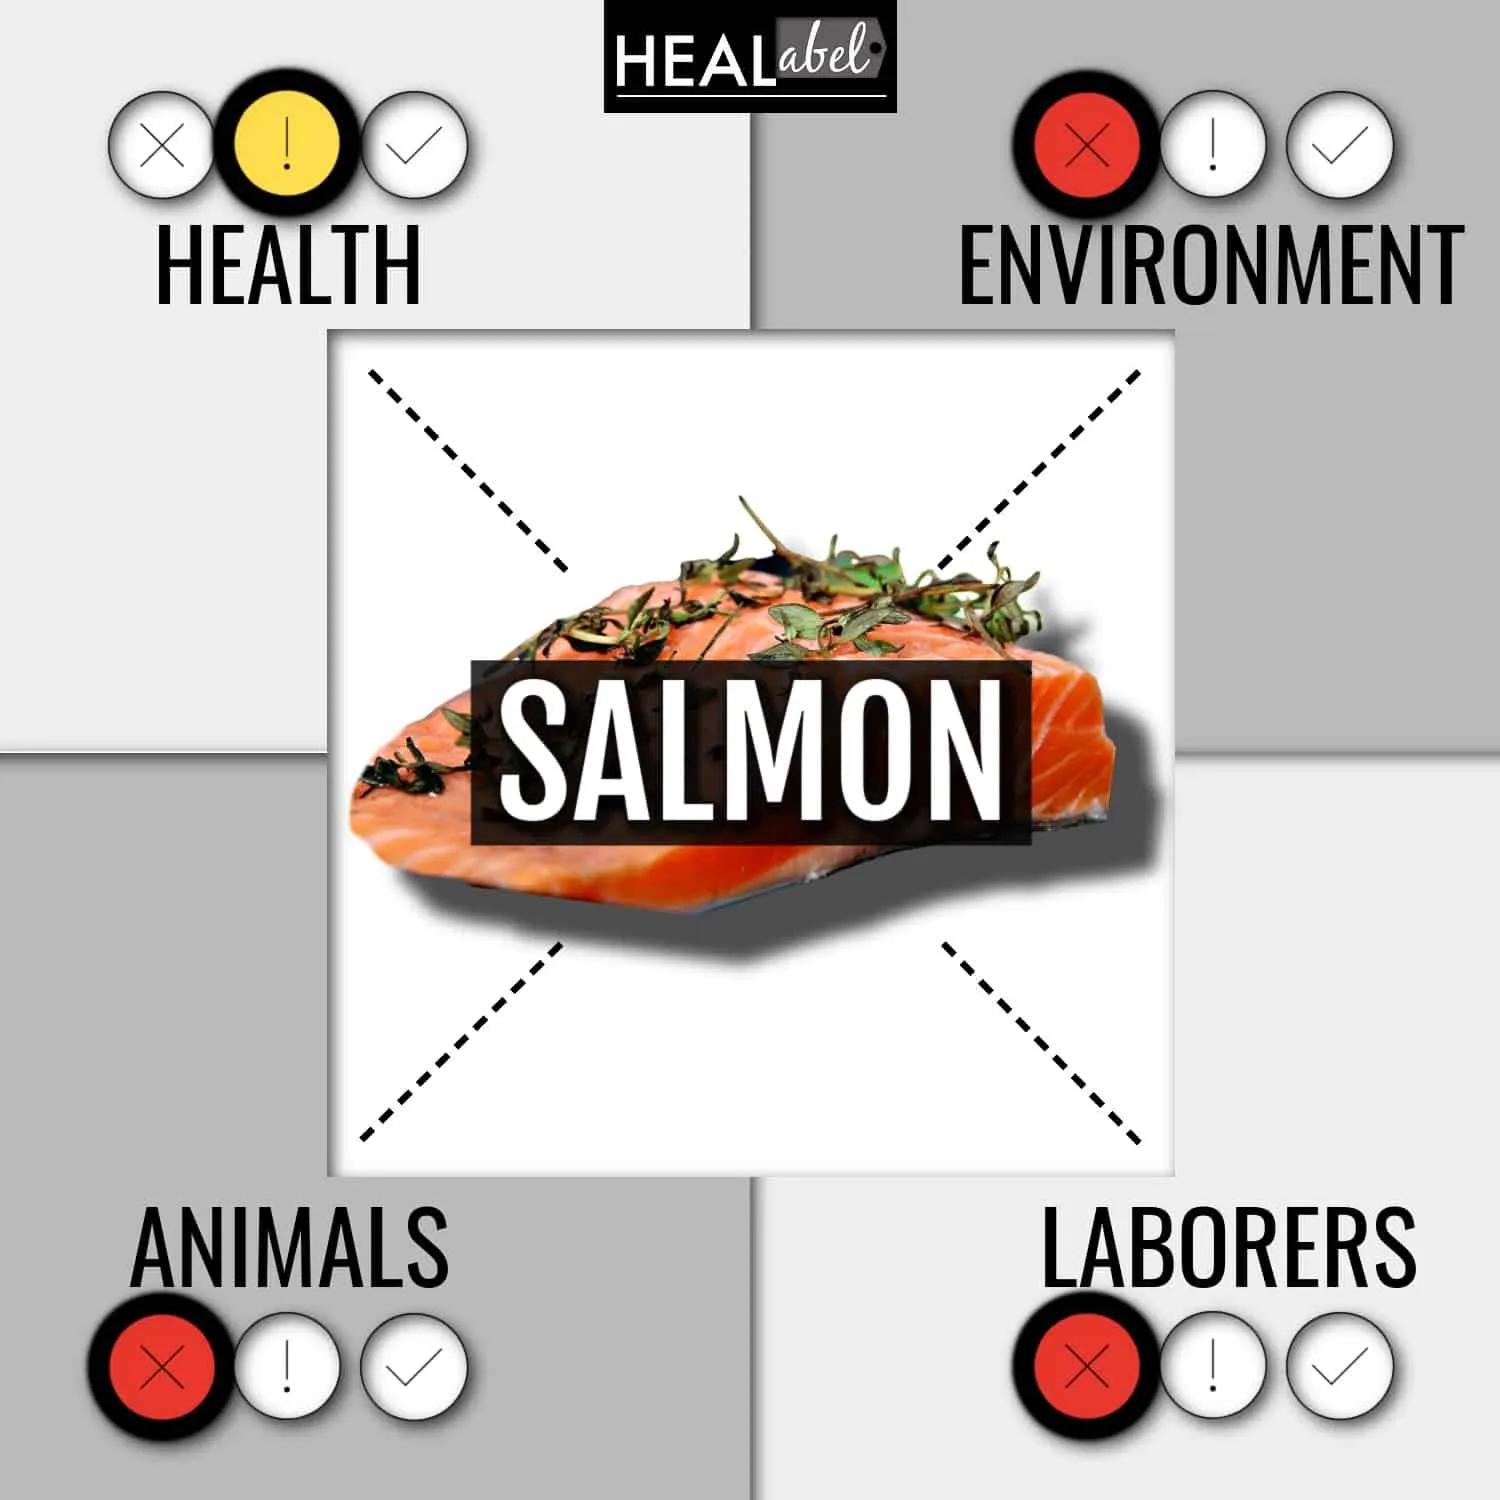 smoked salmon acidic or alkaline - Can you eat salmon on a alkaline diet